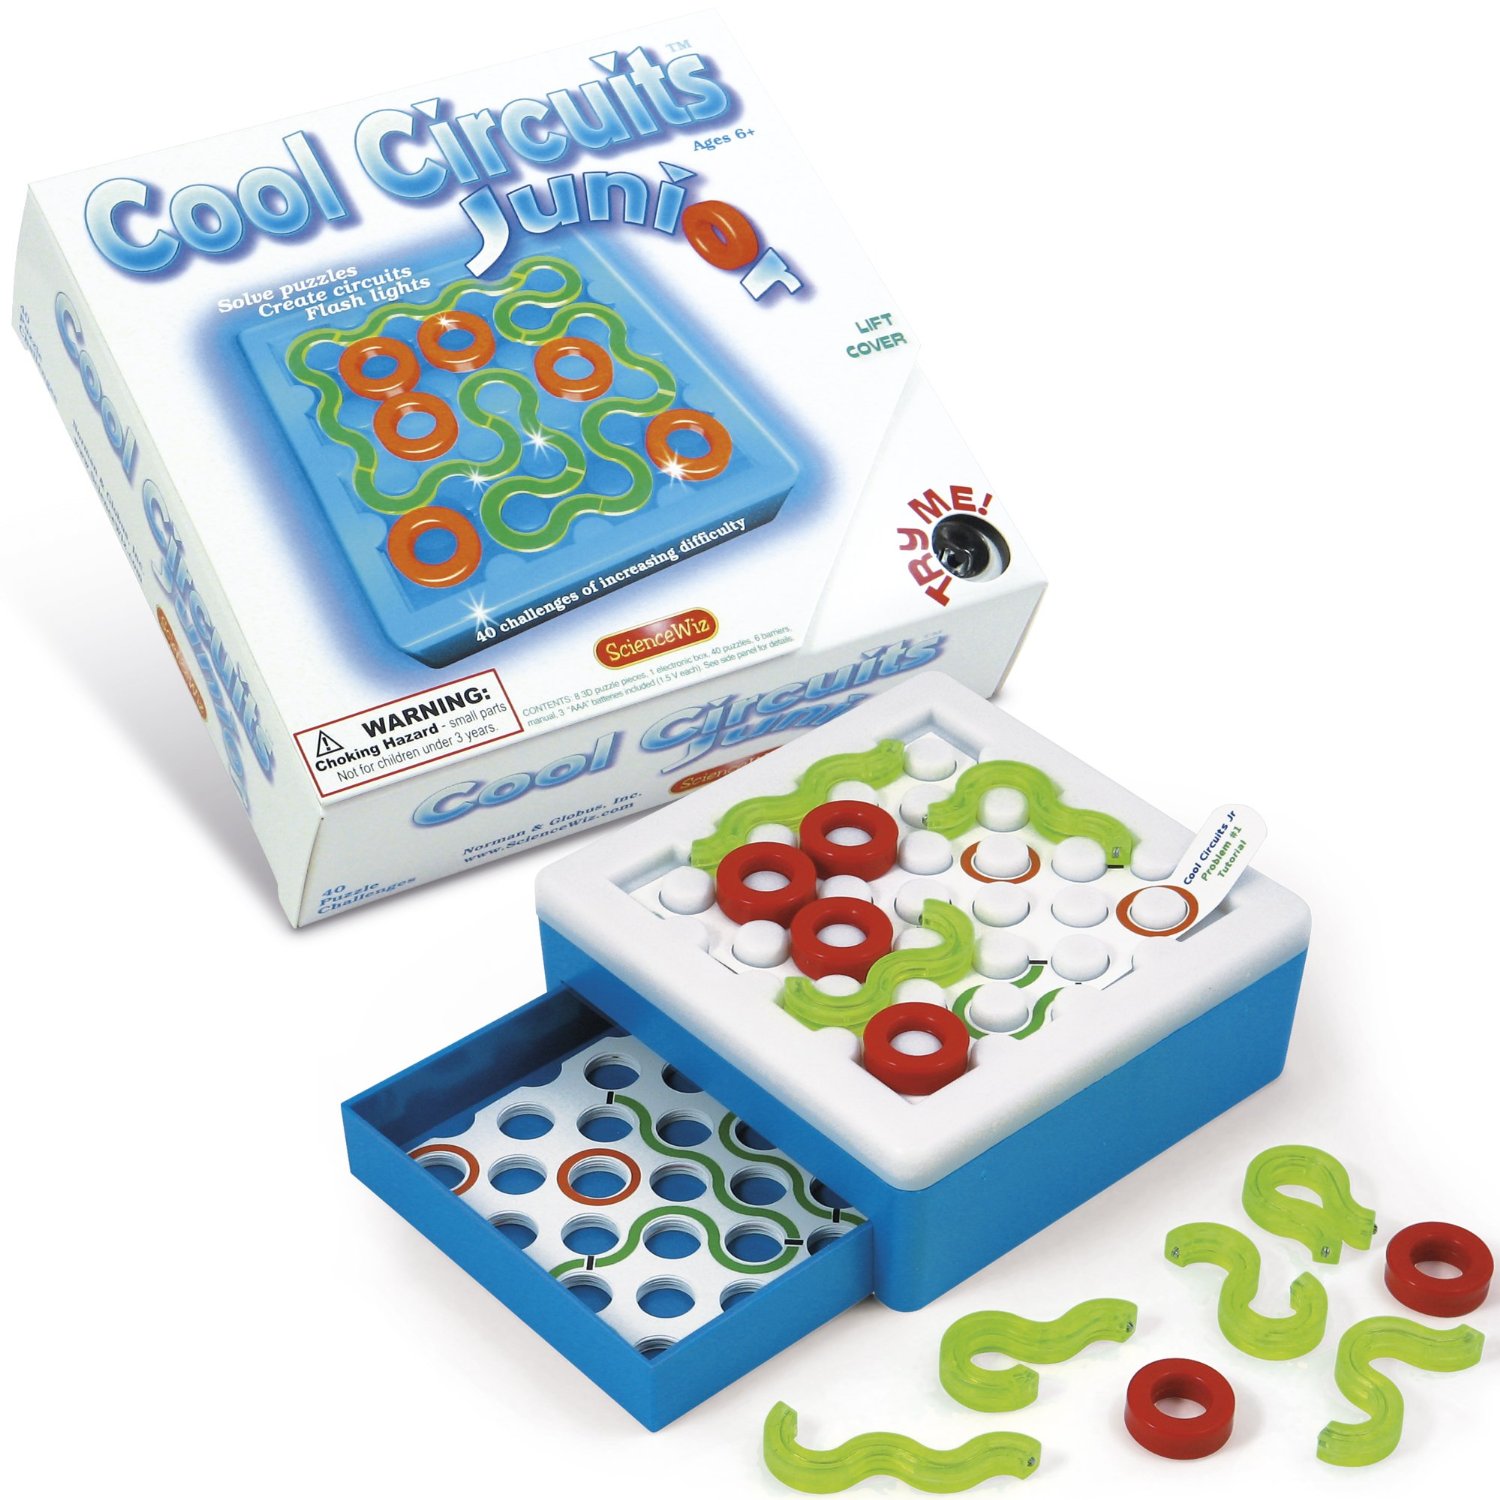 Amazon: Science Wiz Cool Circuits Junior Puzzle Just $15.79! (Lowest Price We’ve Seen on Amazon)